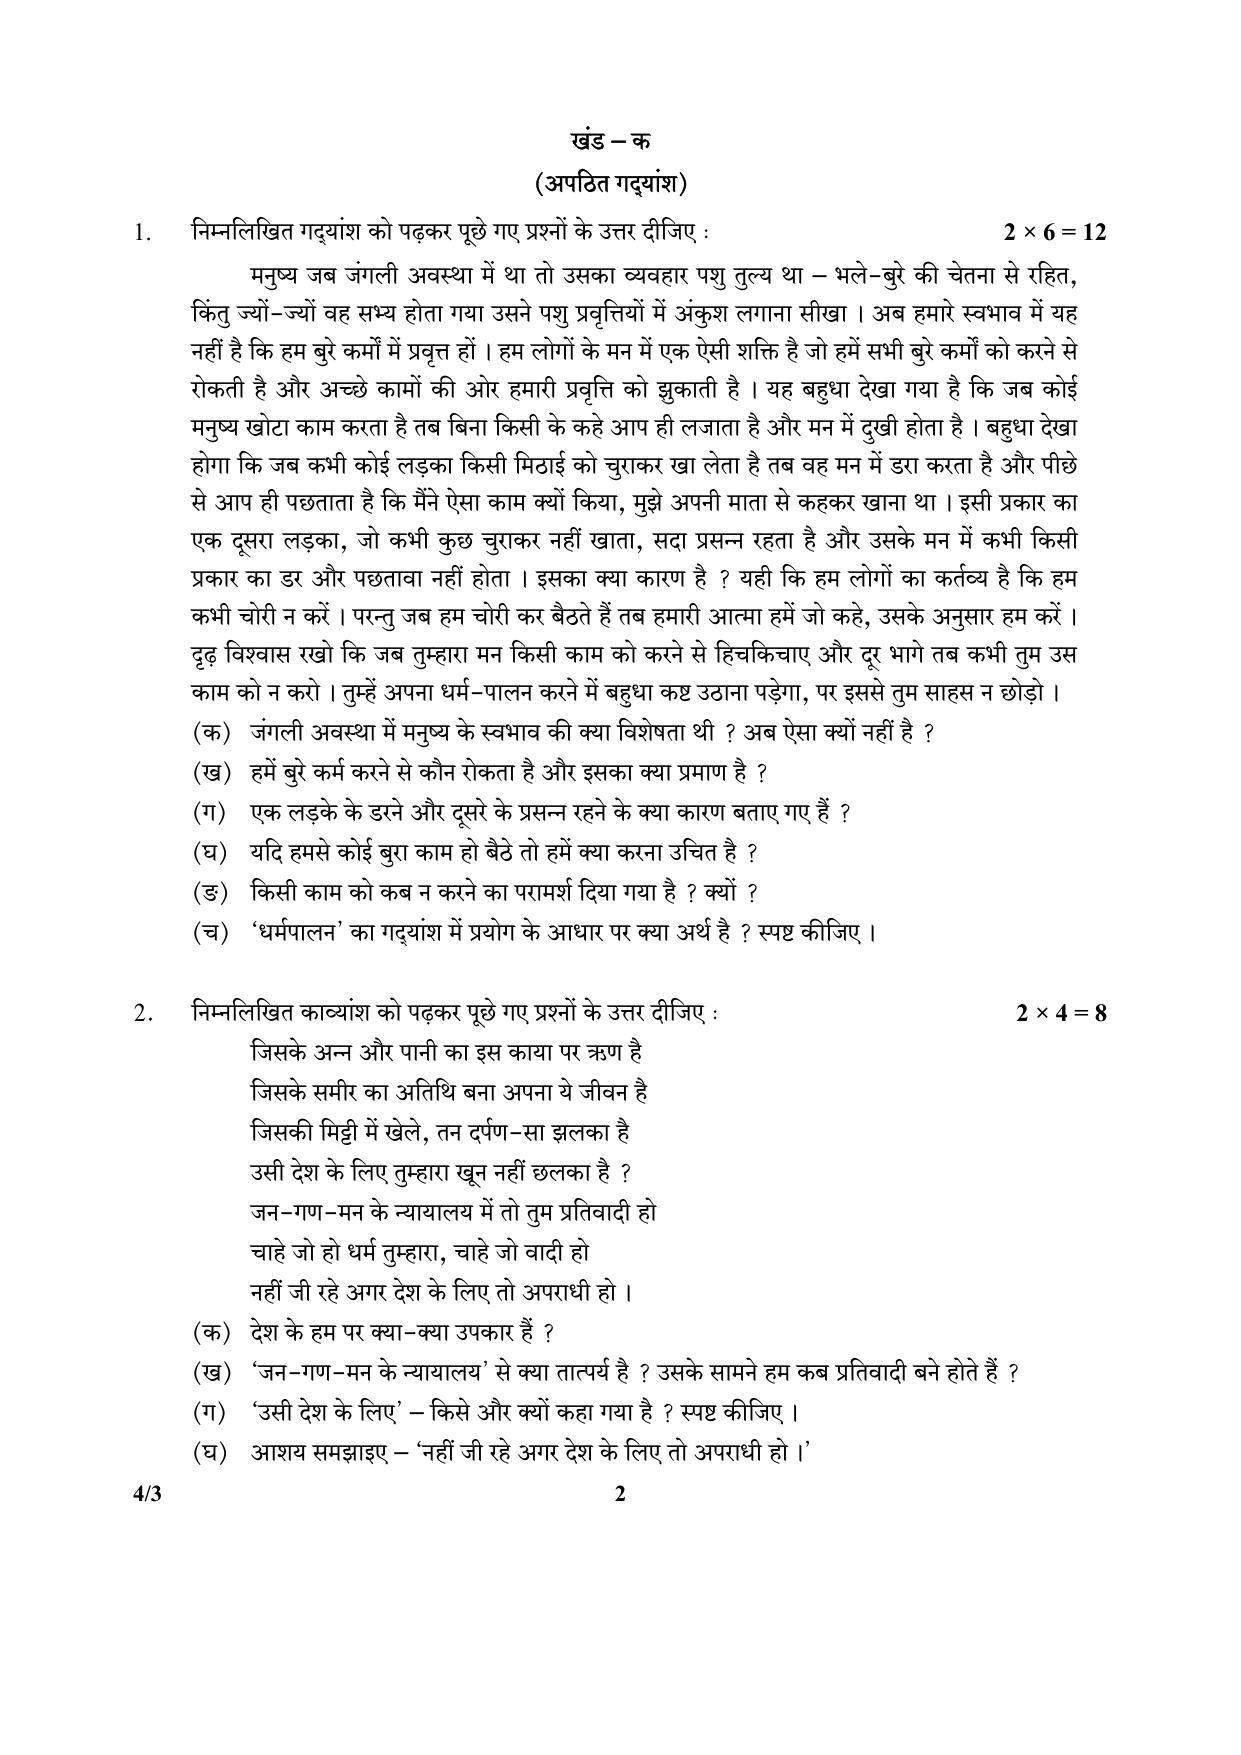 CBSE Class 10 4-3_Hindi 2017-comptt Question Paper - Page 2